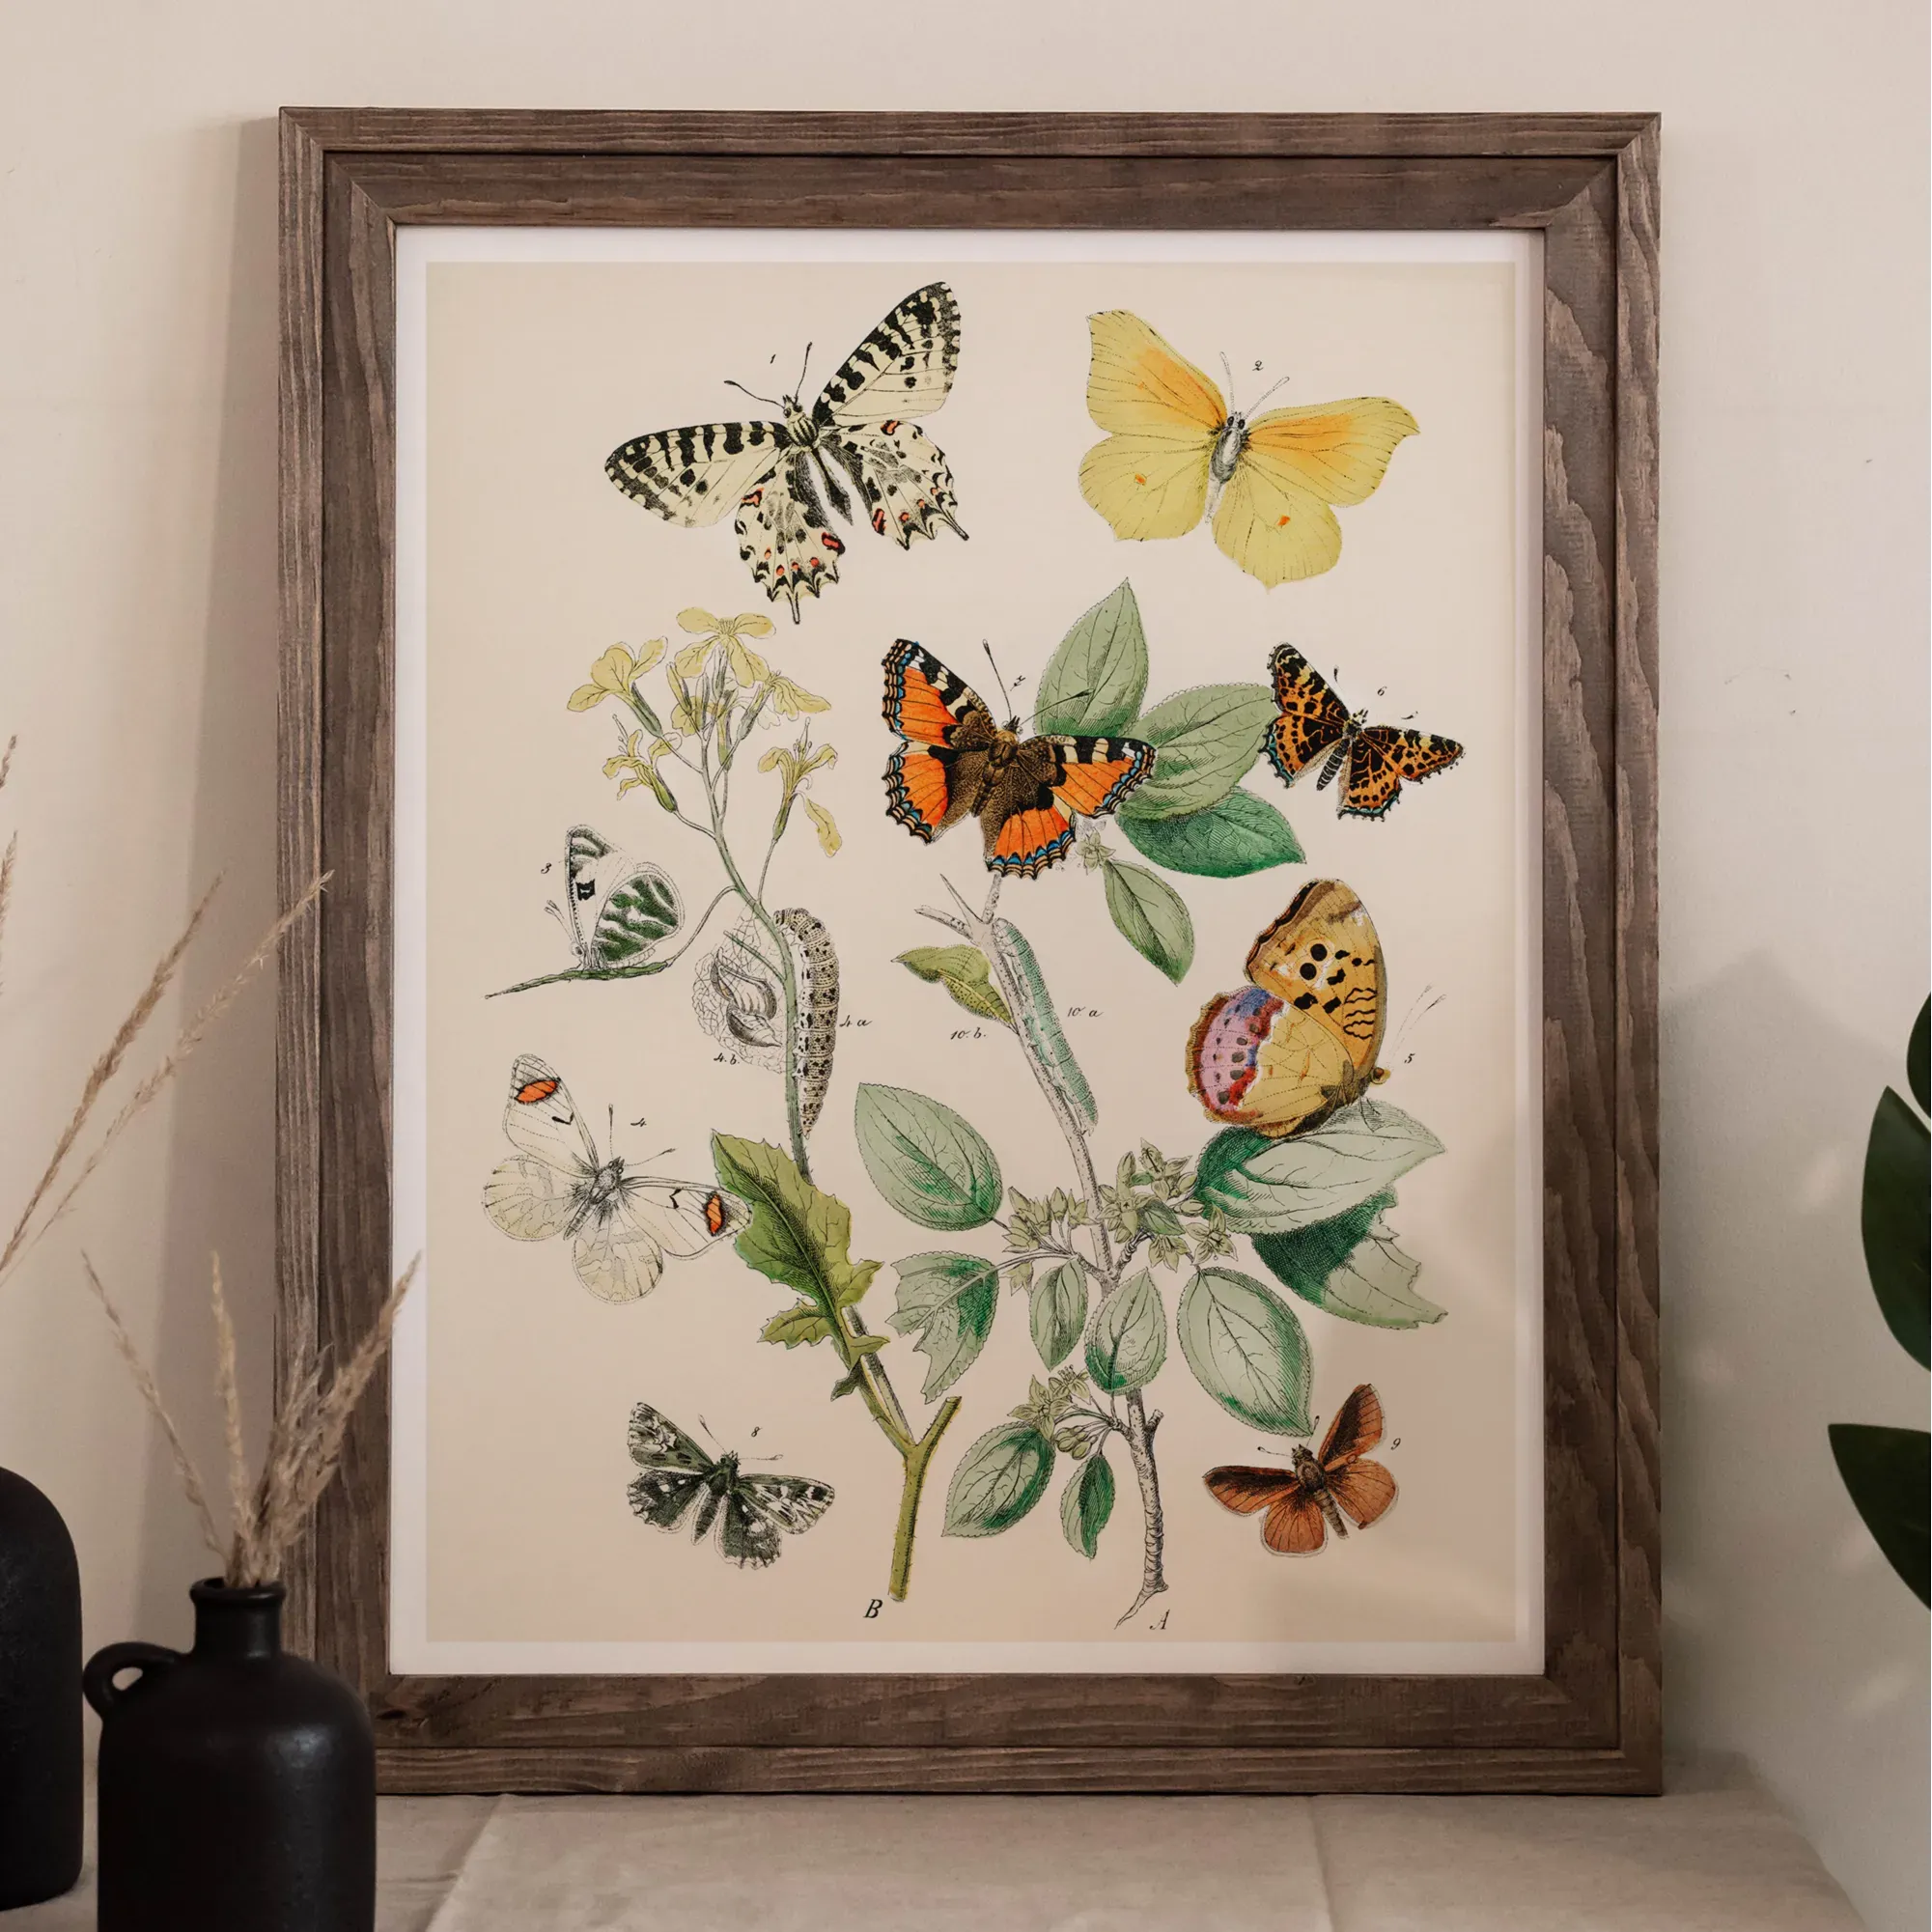 European Butterflies And Moths 3 By William Forsell Kirby Fine Art Print - 16’x20’ - Posters Prints & Visual